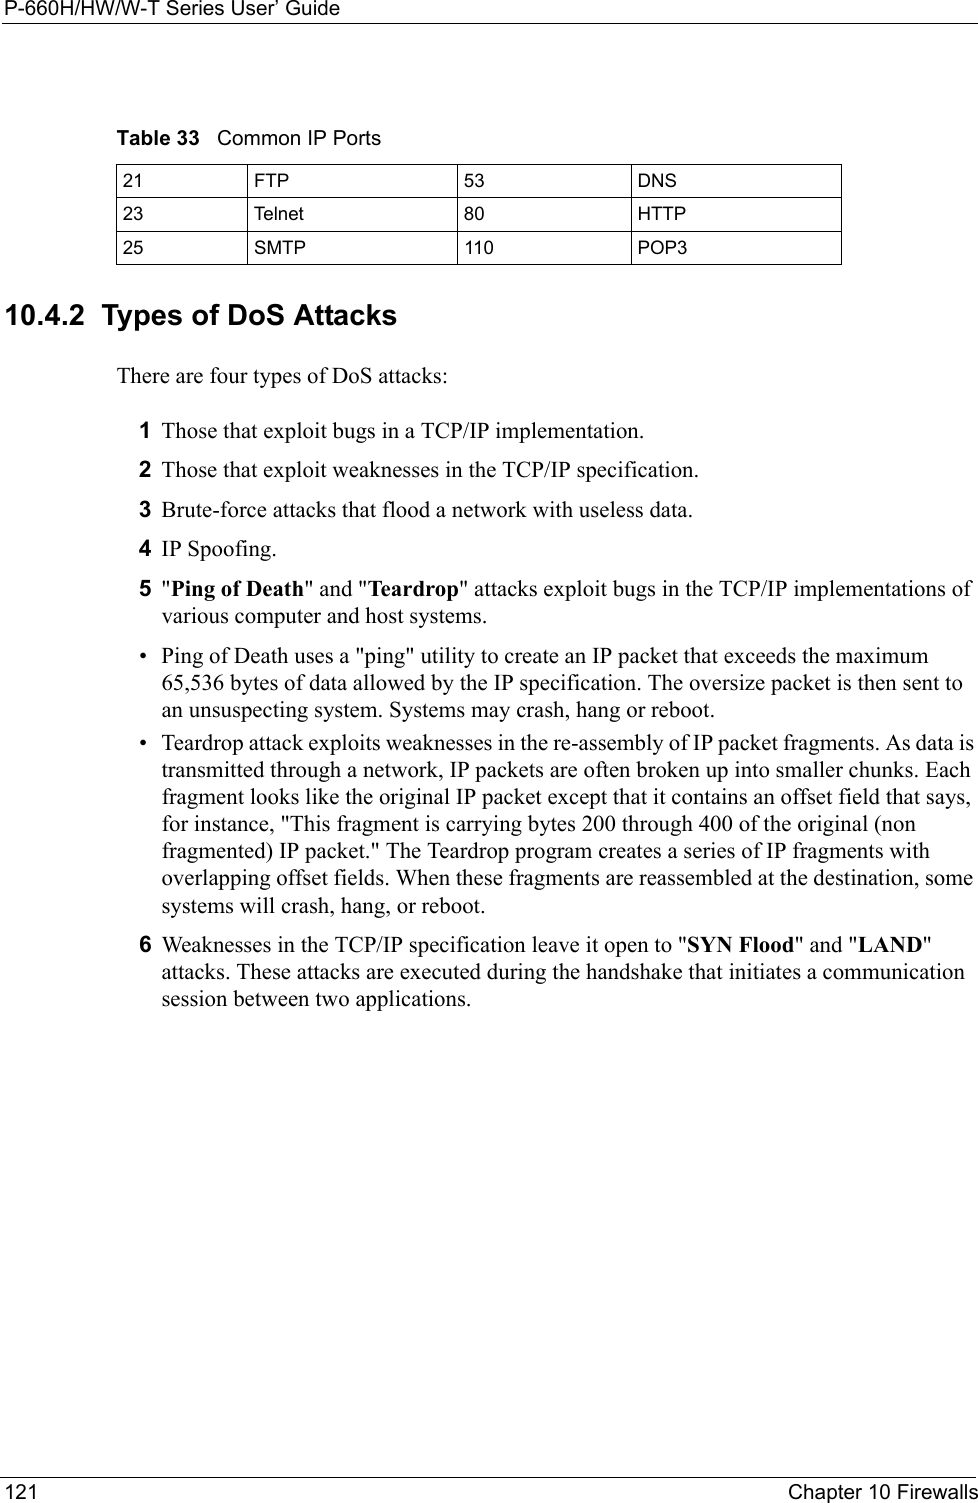 P-660H/HW/W-T Series User’ Guide121 Chapter 10 Firewalls10.4.2  Types of DoS AttacksThere are four types of DoS attacks: 1Those that exploit bugs in a TCP/IP implementation.2Those that exploit weaknesses in the TCP/IP specification.3Brute-force attacks that flood a network with useless data. 4IP Spoofing.5&quot;Ping of Death&quot; and &quot;Teardrop&quot; attacks exploit bugs in the TCP/IP implementations of various computer and host systems. • Ping of Death uses a &quot;ping&quot; utility to create an IP packet that exceeds the maximum 65,536 bytes of data allowed by the IP specification. The oversize packet is then sent to an unsuspecting system. Systems may crash, hang or reboot. • Teardrop attack exploits weaknesses in the re-assembly of IP packet fragments. As data is transmitted through a network, IP packets are often broken up into smaller chunks. Each fragment looks like the original IP packet except that it contains an offset field that says, for instance, &quot;This fragment is carrying bytes 200 through 400 of the original (non fragmented) IP packet.&quot; The Teardrop program creates a series of IP fragments with overlapping offset fields. When these fragments are reassembled at the destination, some systems will crash, hang, or reboot. 6Weaknesses in the TCP/IP specification leave it open to &quot;SYN Flood&quot; and &quot;LAND&quot; attacks. These attacks are executed during the handshake that initiates a communication session between two applications.Table 33   Common IP Ports21 FTP 53 DNS23 Telnet 80 HTTP25 SMTP 110 POP3